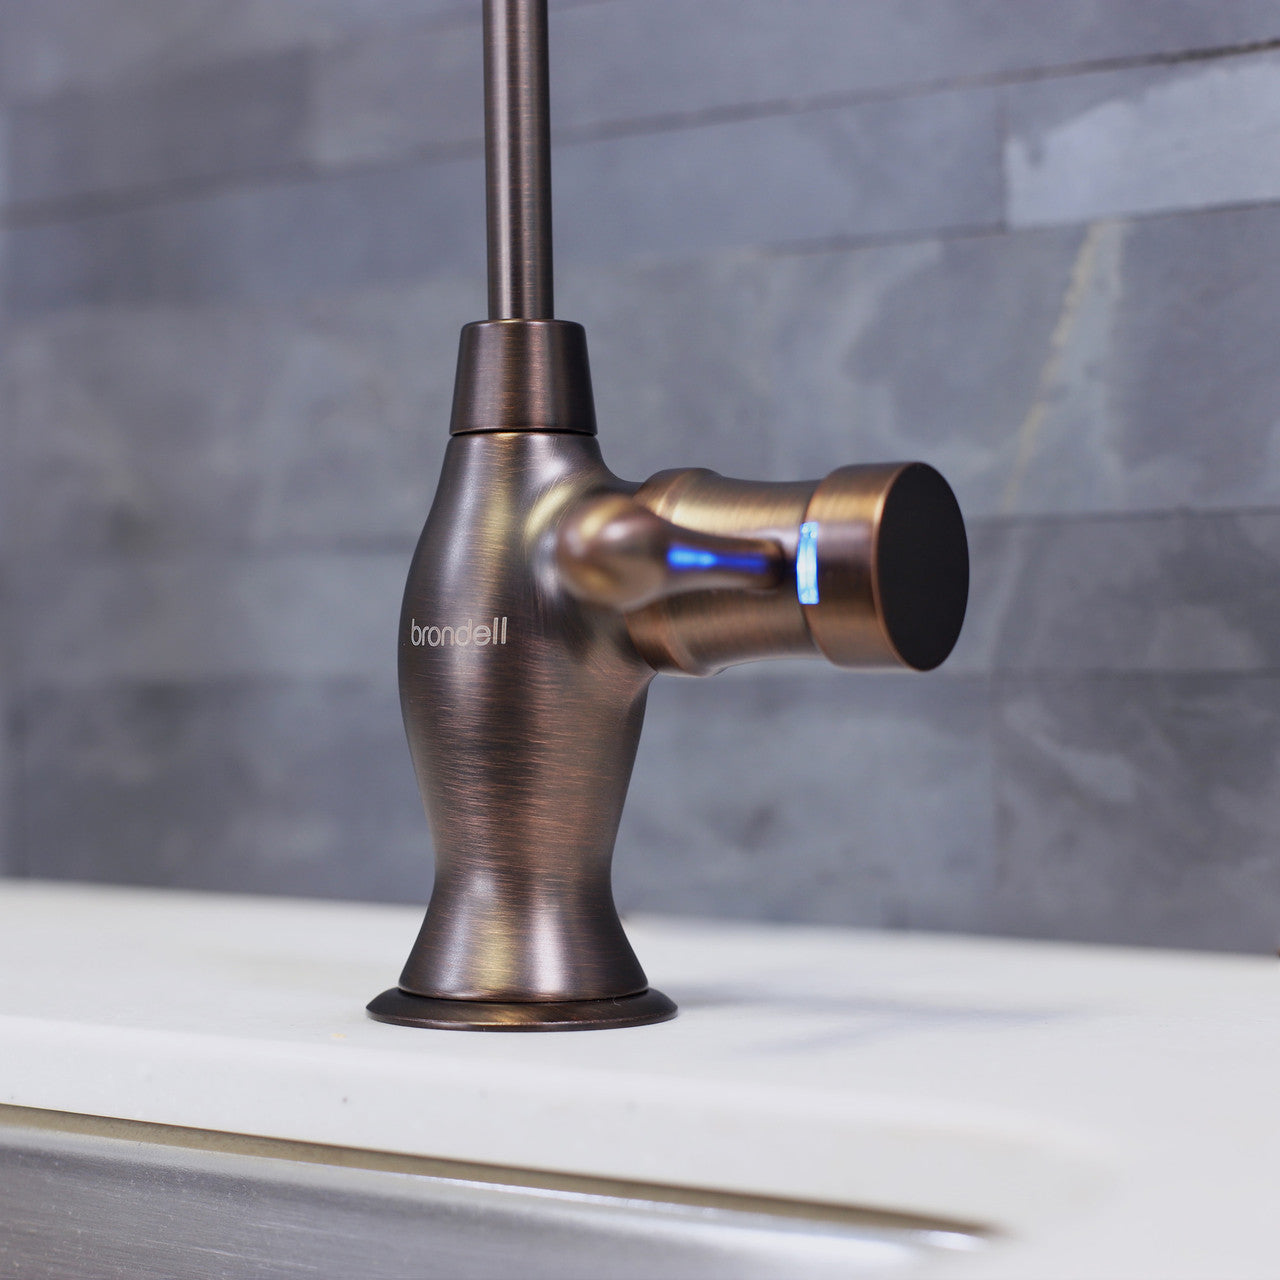 Sequoia Faucet with LED timer for RO system